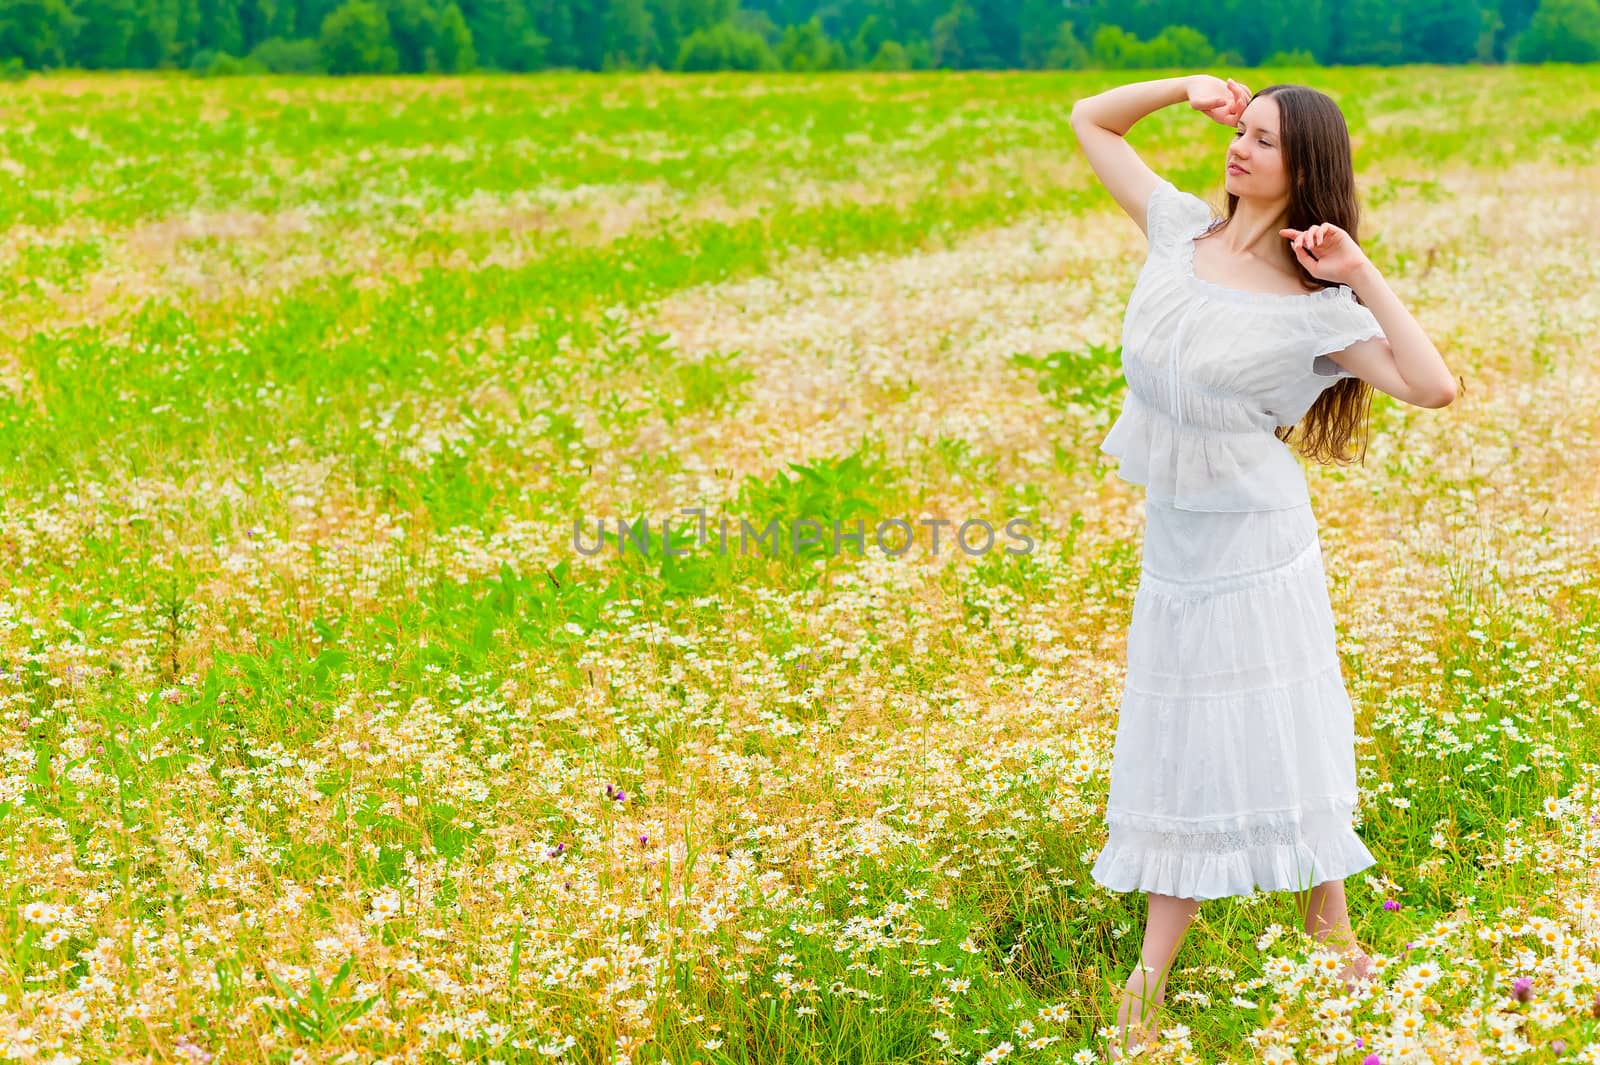 young brunette woman walking in a field with daisies by kosmsos111